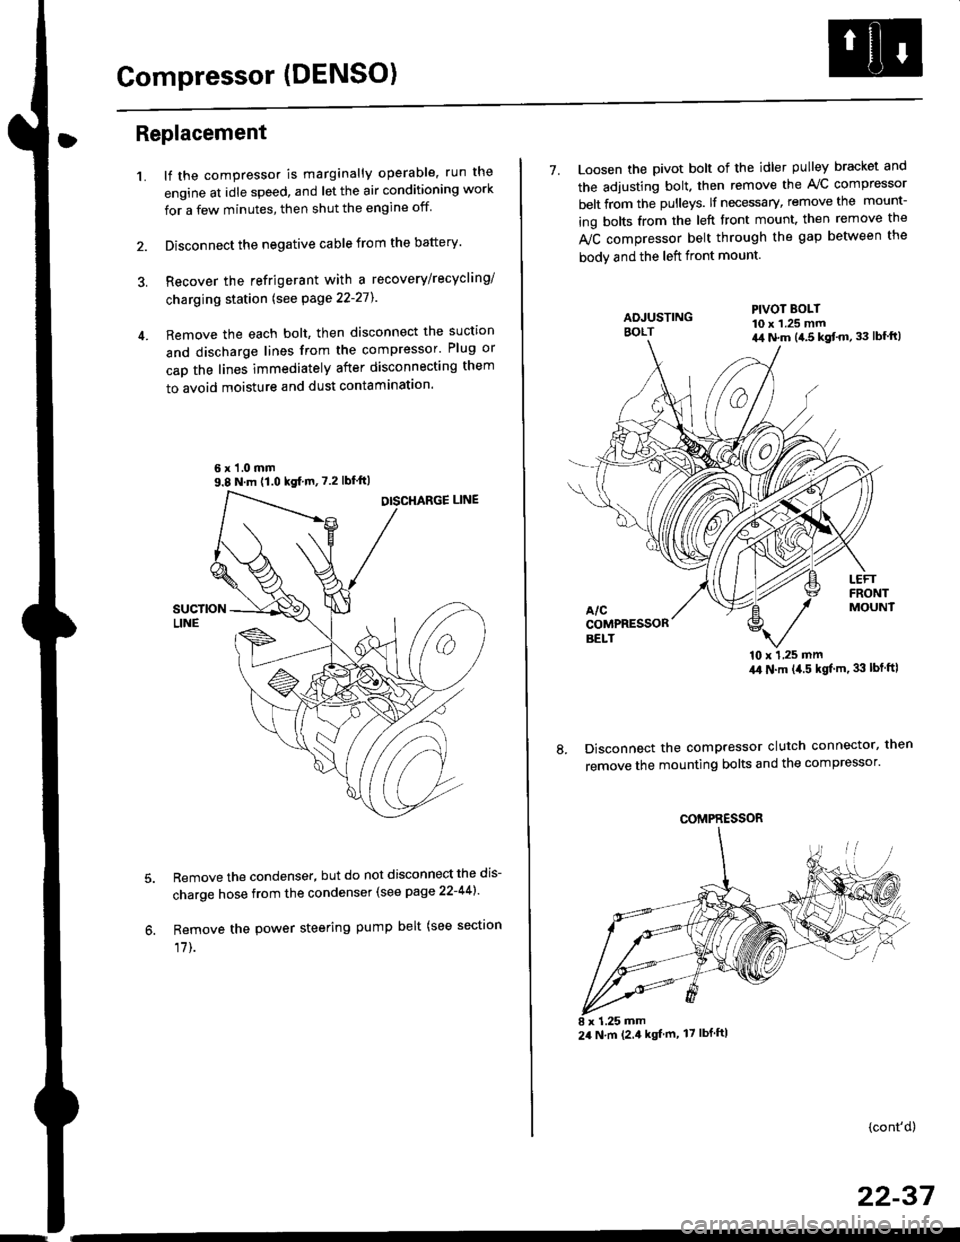 HONDA CIVIC 1999 6.G User Guide Compressor (DENSO)
Replacement
1.lf the compressor is marginally operable, run the
engine at idle speed, and let the air conditioning work
for a few minutes, then shut the engine off
Disconnect the ne